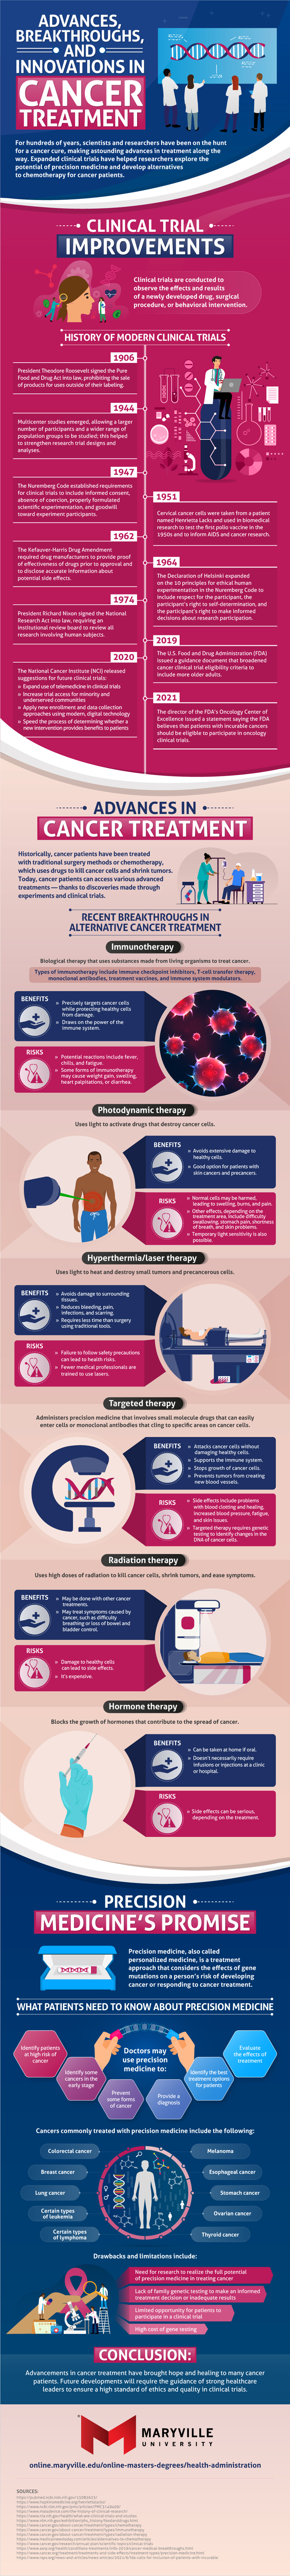 Innovations and advances in cancer treatment.